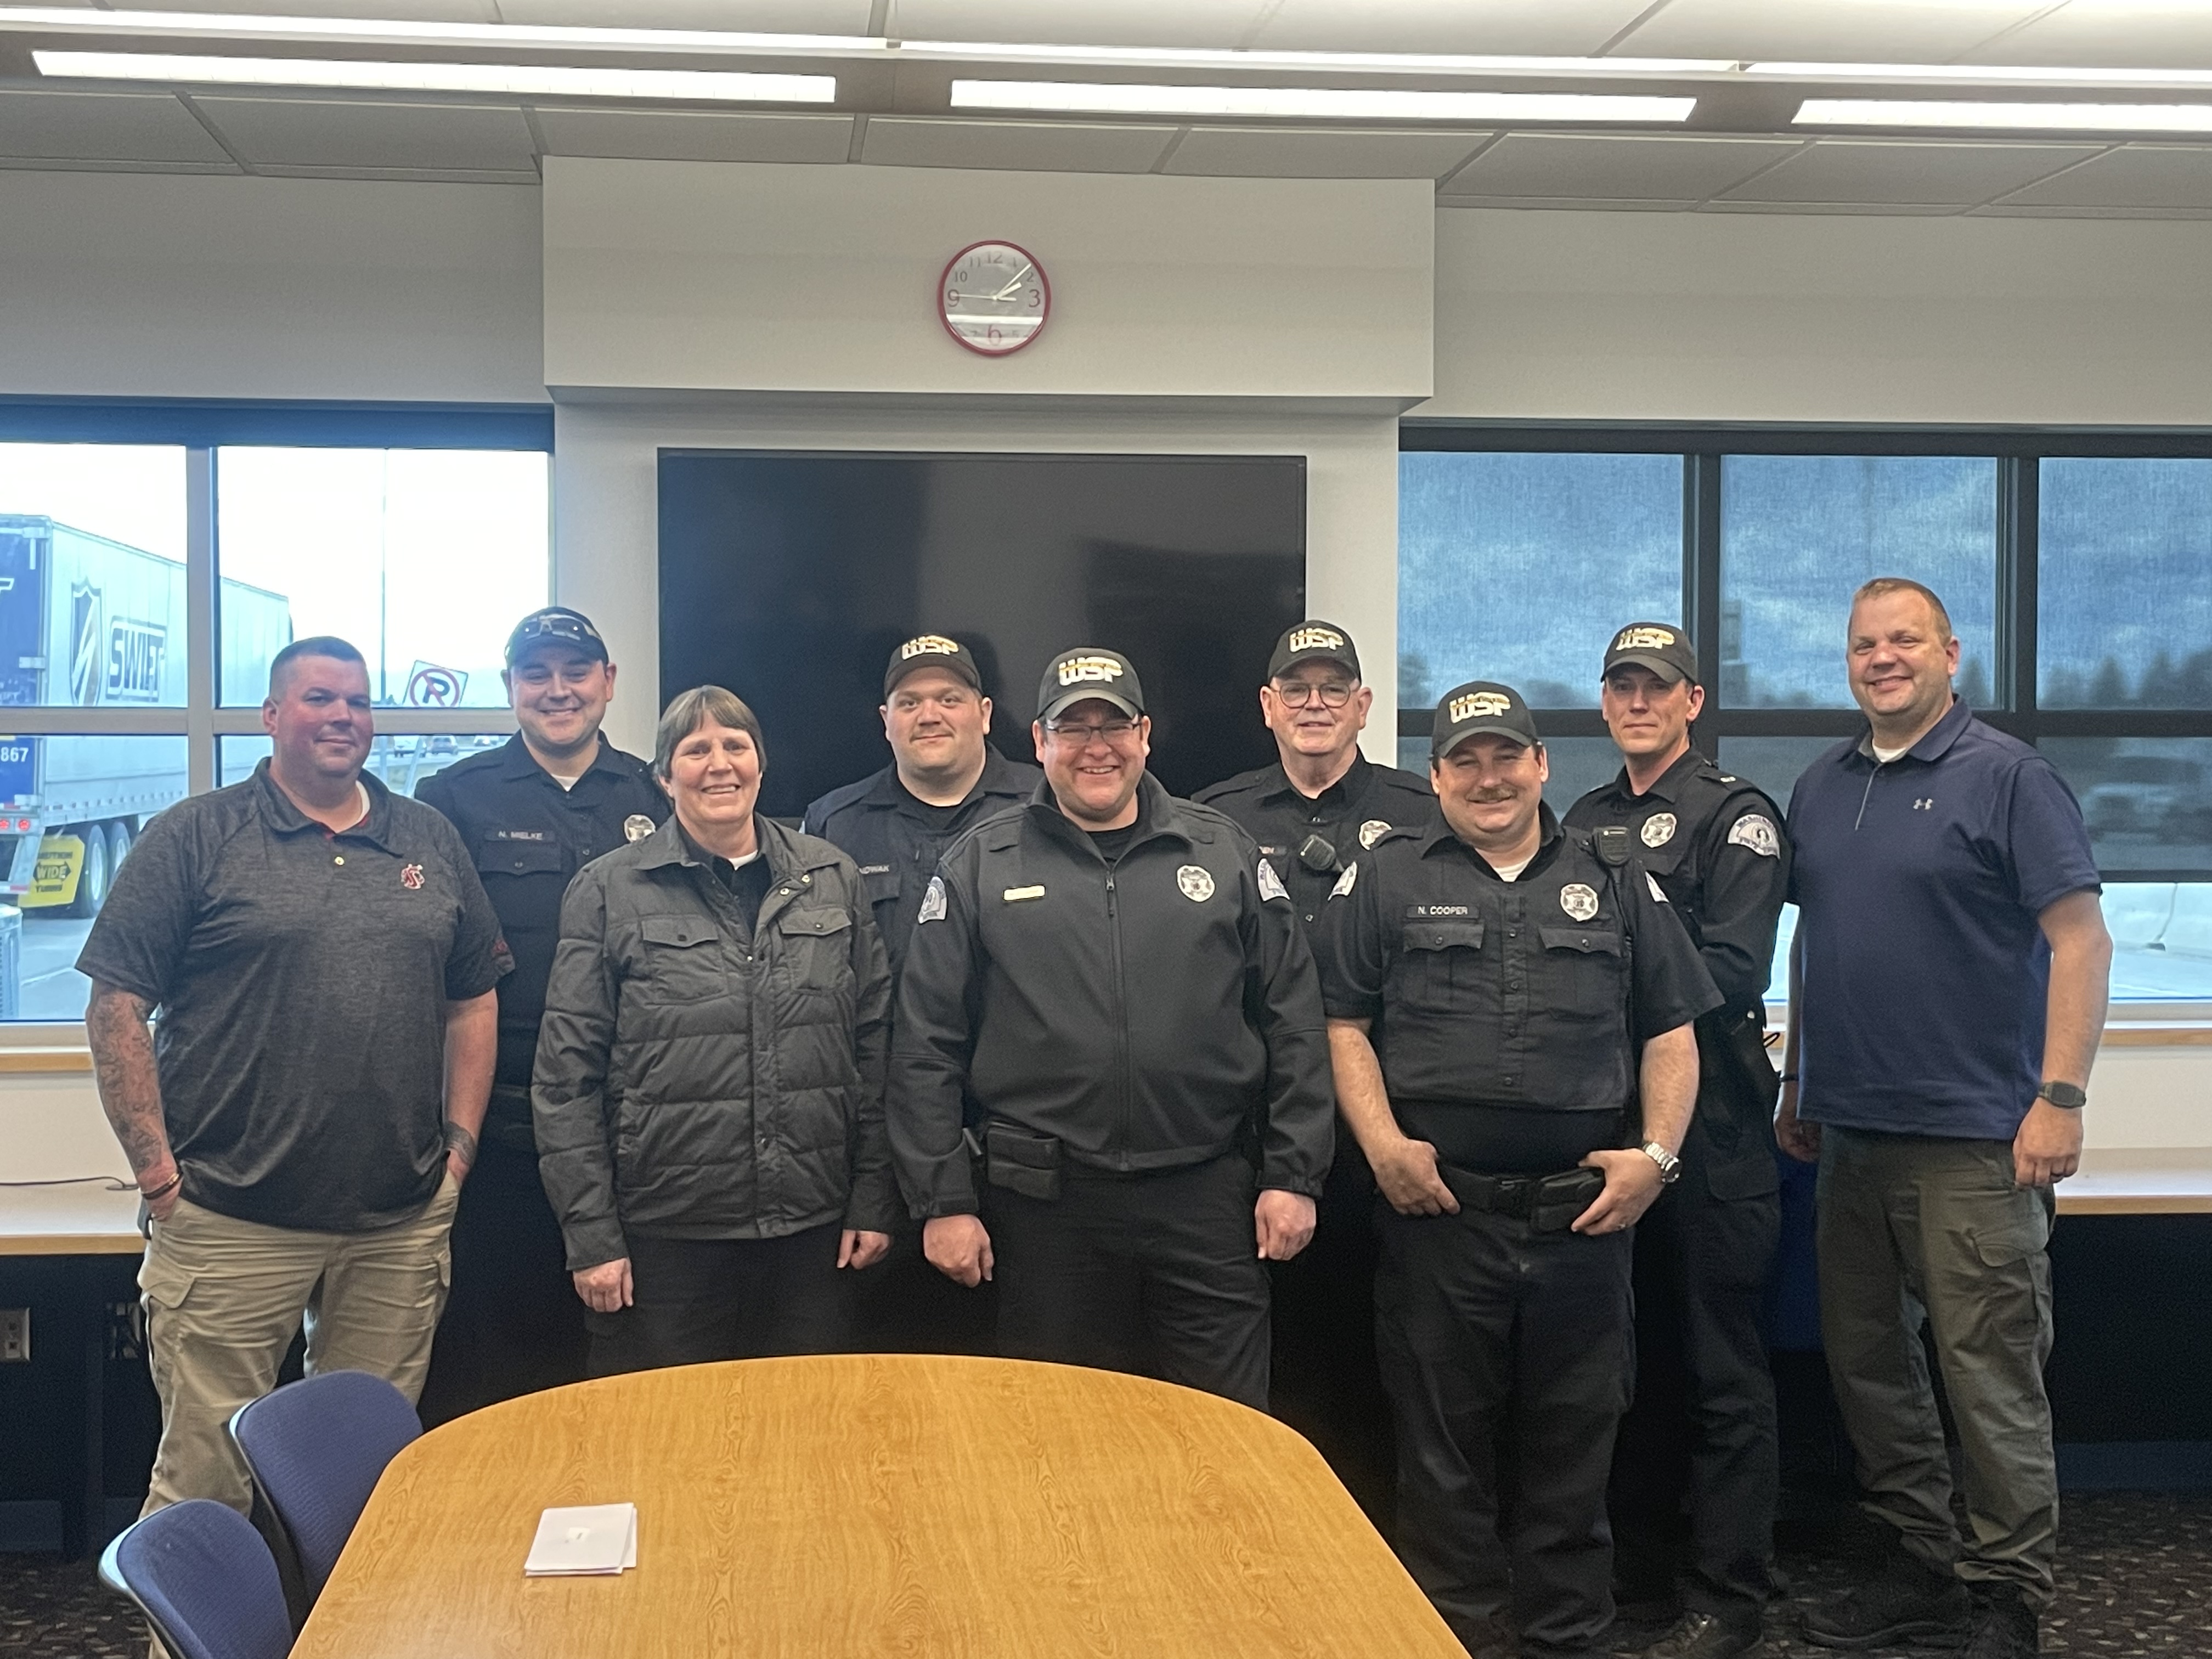 Picture of Washington State Patrol CVEO's, including PROTEC17 Chapter Officer Bennet Olsson. They are wearing their uniforms and smiling in together.